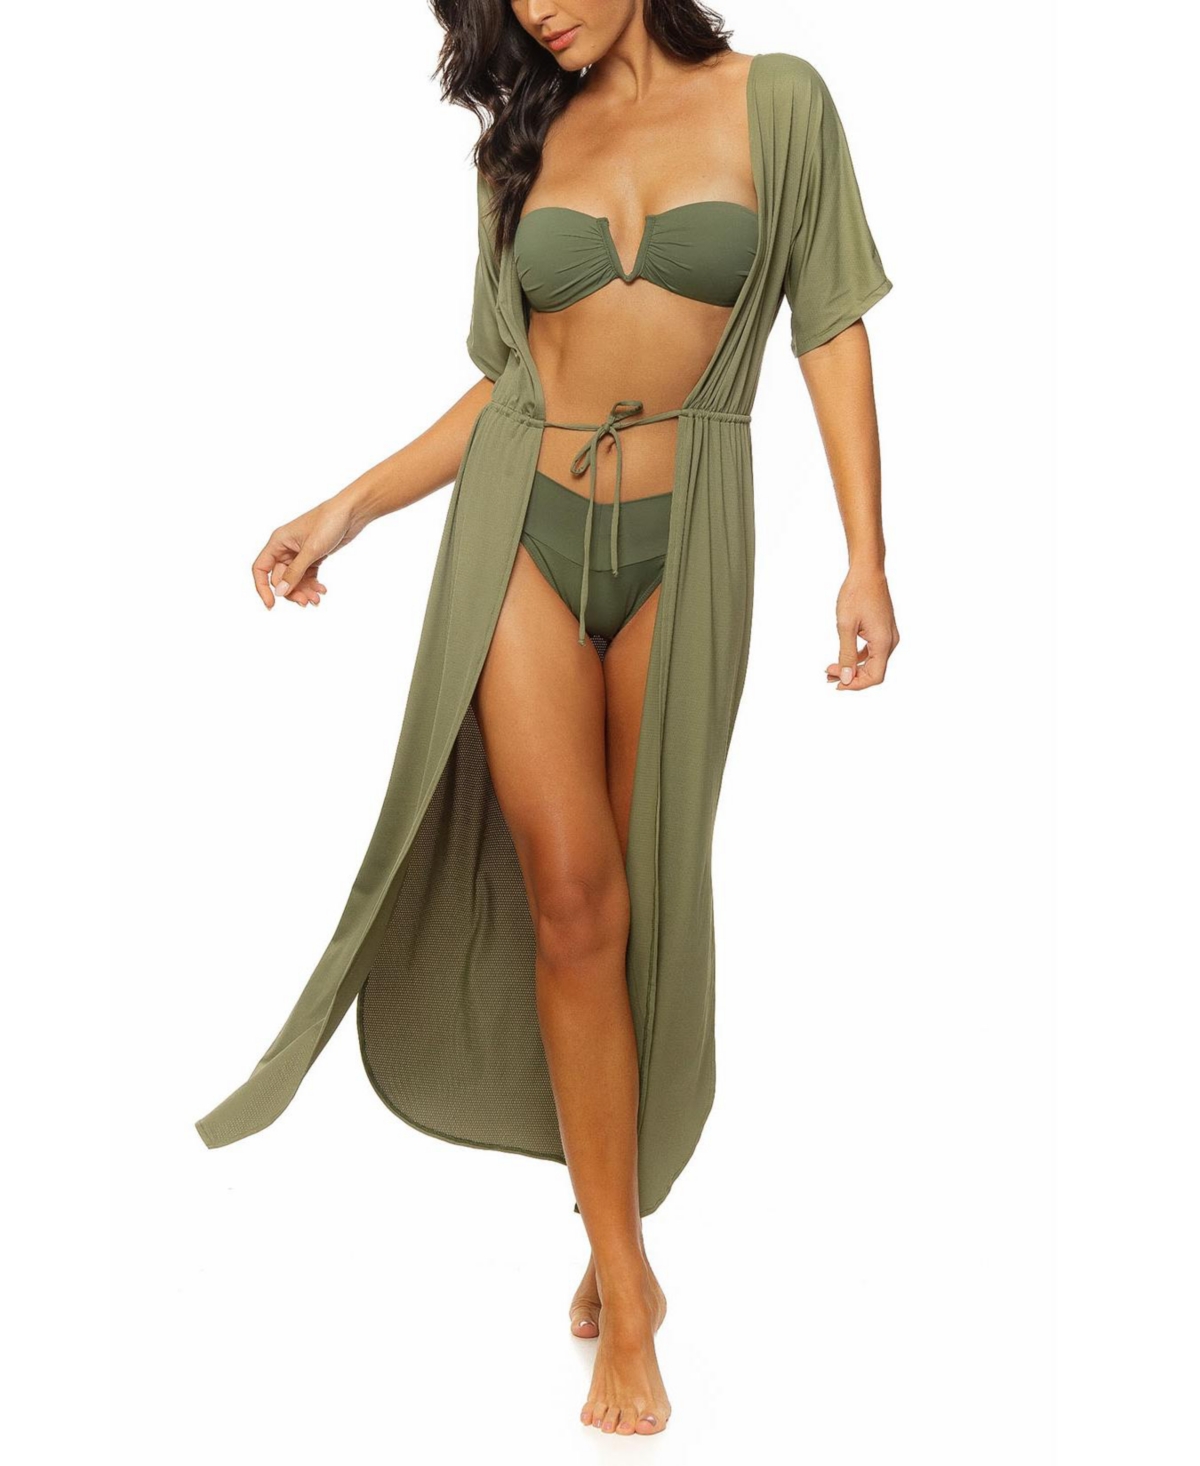 Women's Tie Front Long Kimono Cover-up - Turquoise